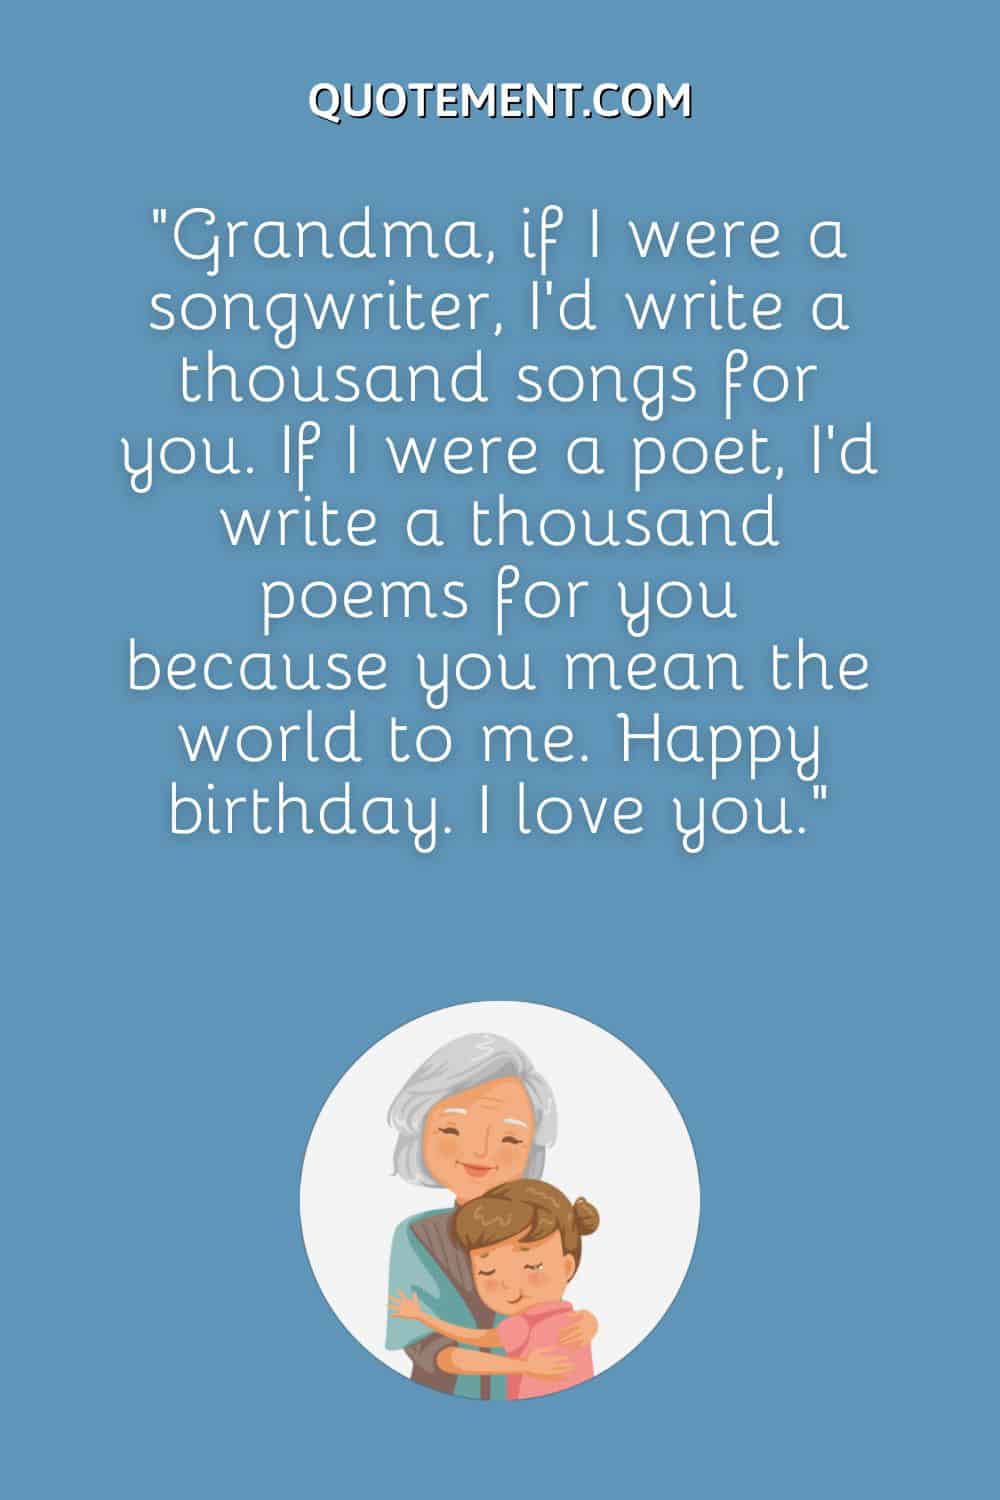 Grandma, if I were a songwriter, I’d write a thousand songs for you.